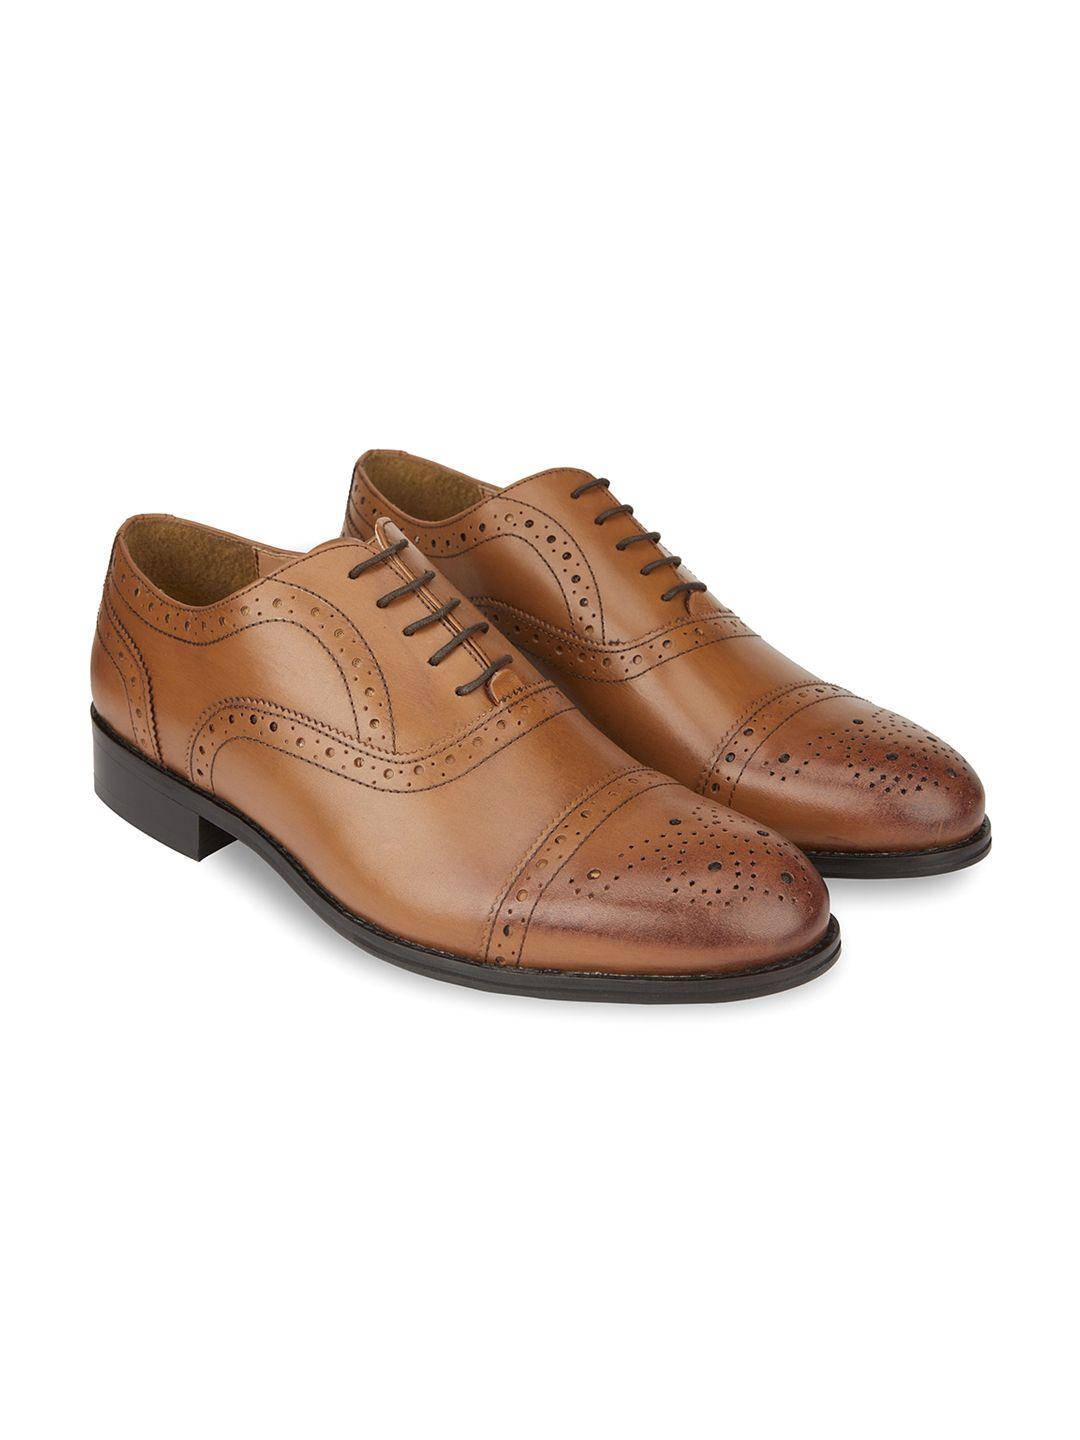 hats off accessories men textured genuine leather formal oxfords